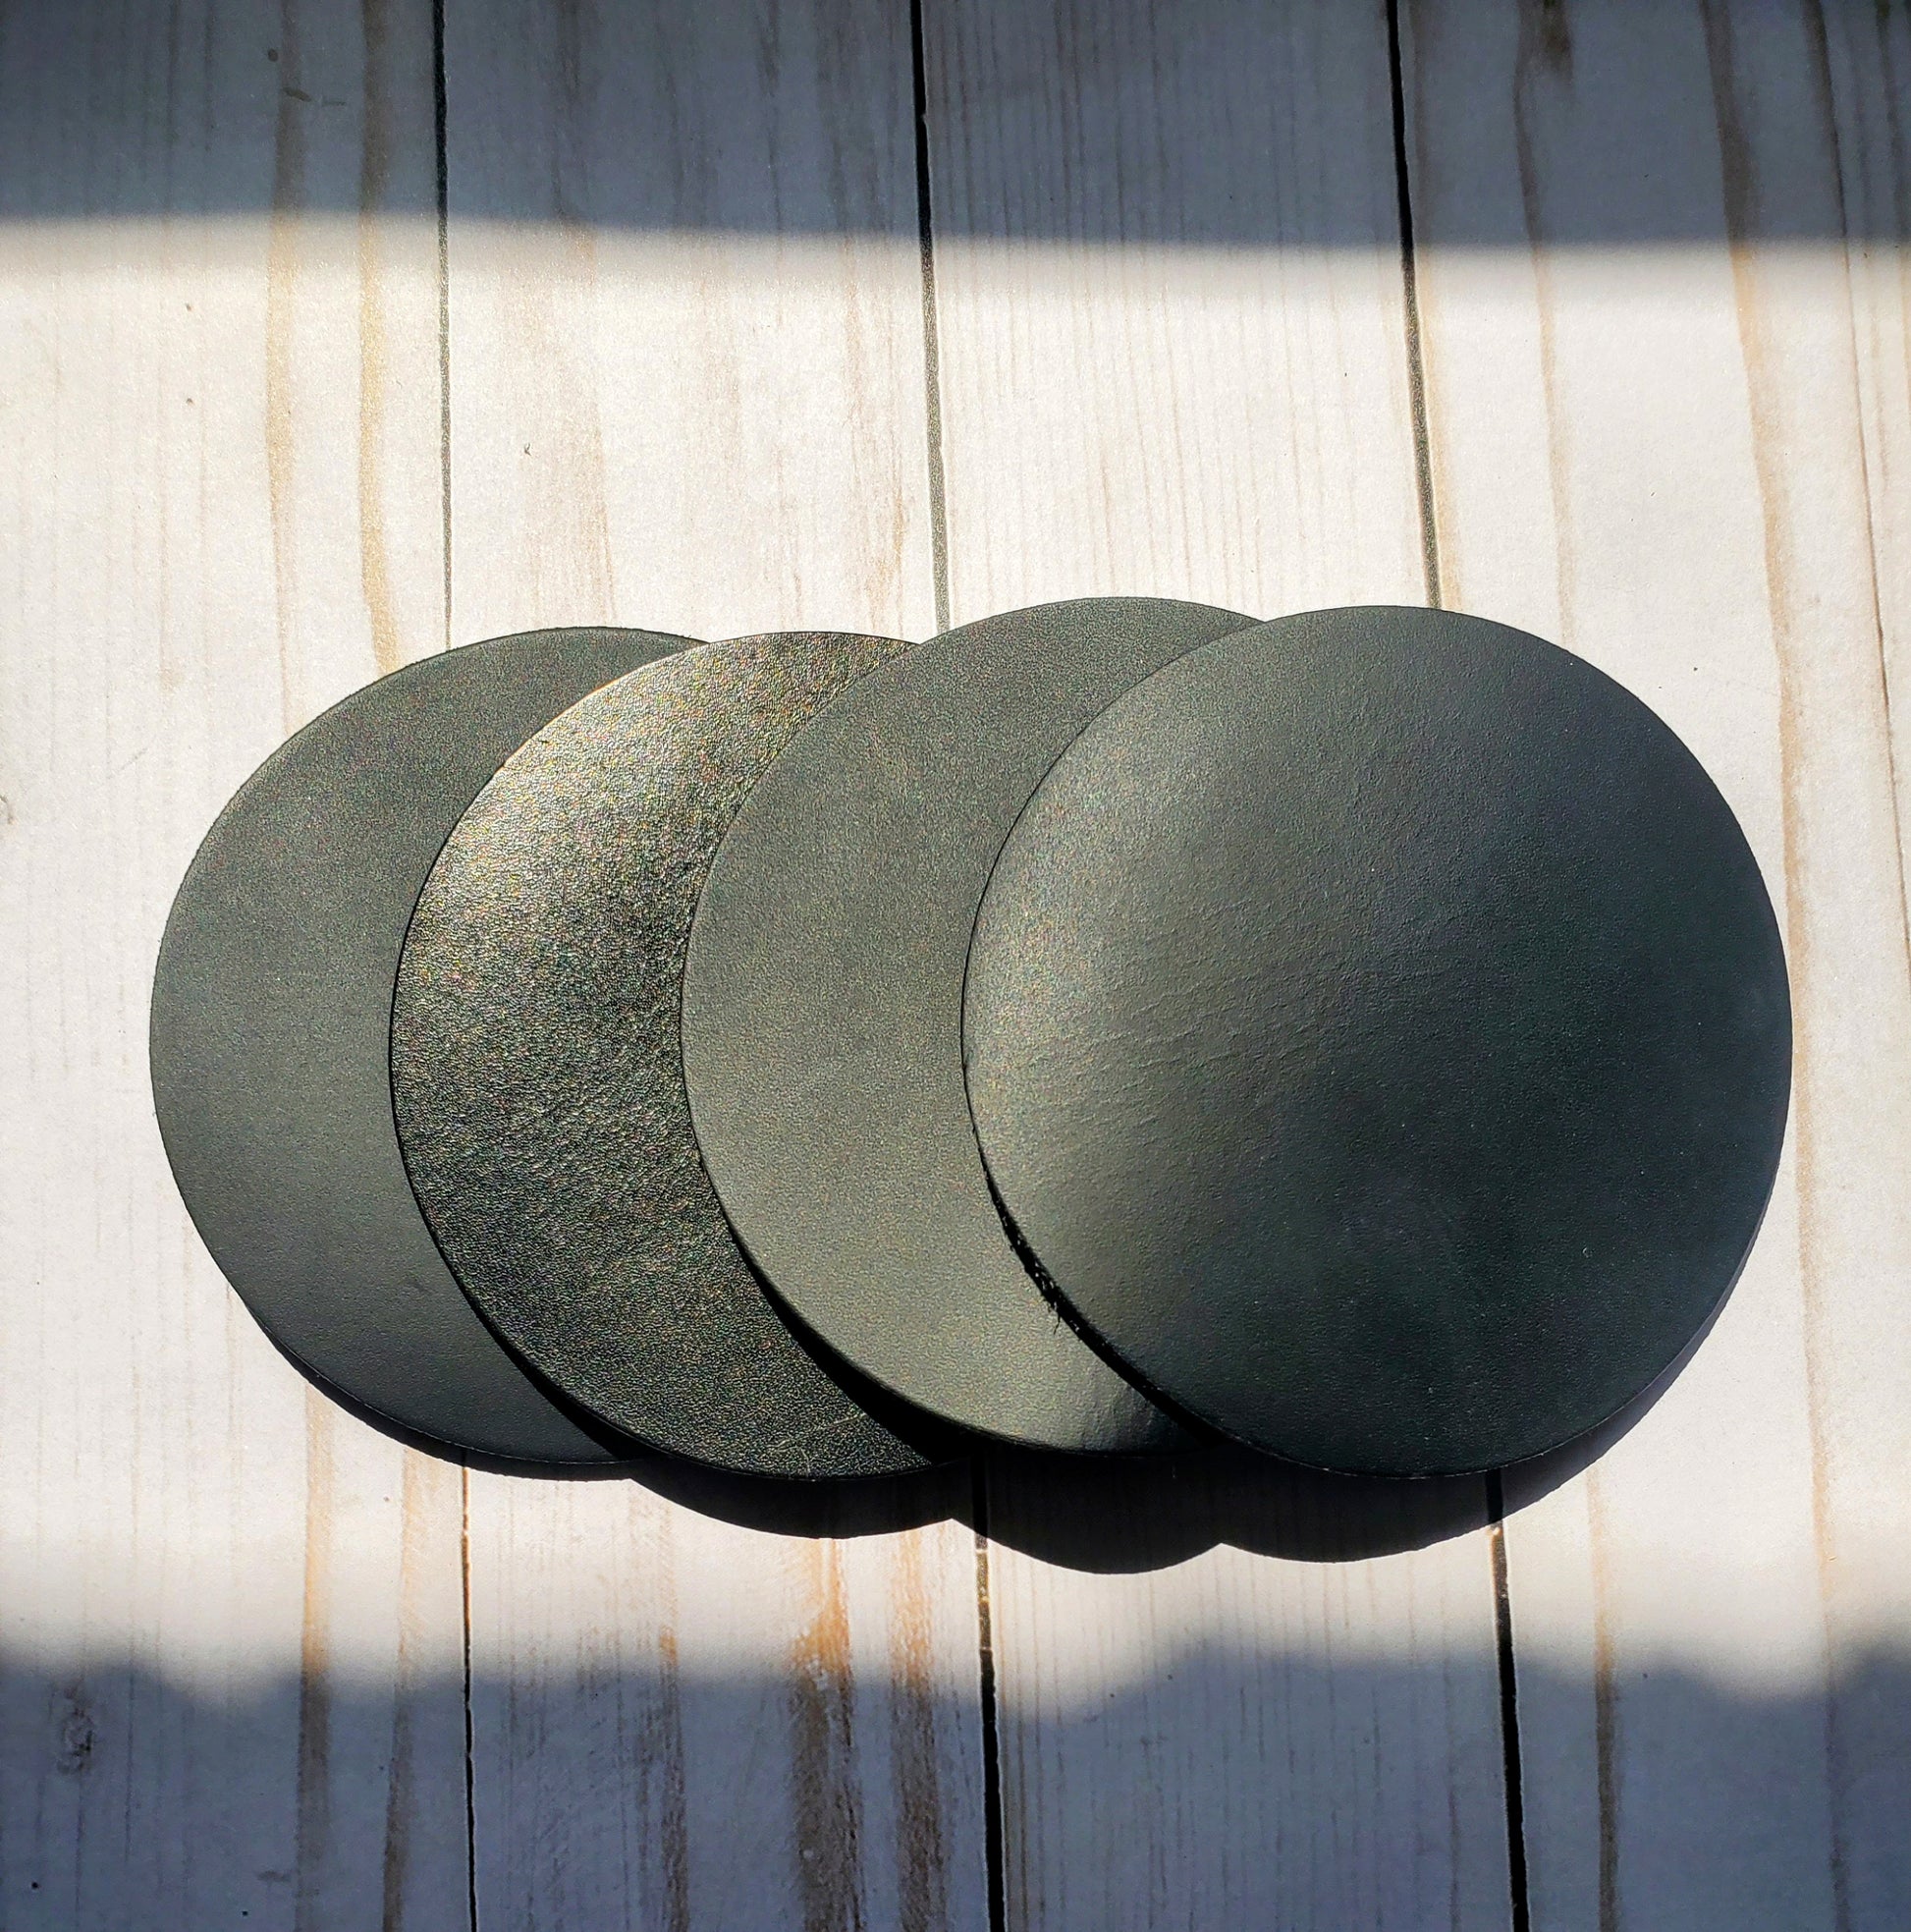 Handmade 4 inch black set of 4 round leather coasters made in Los Angeles,California